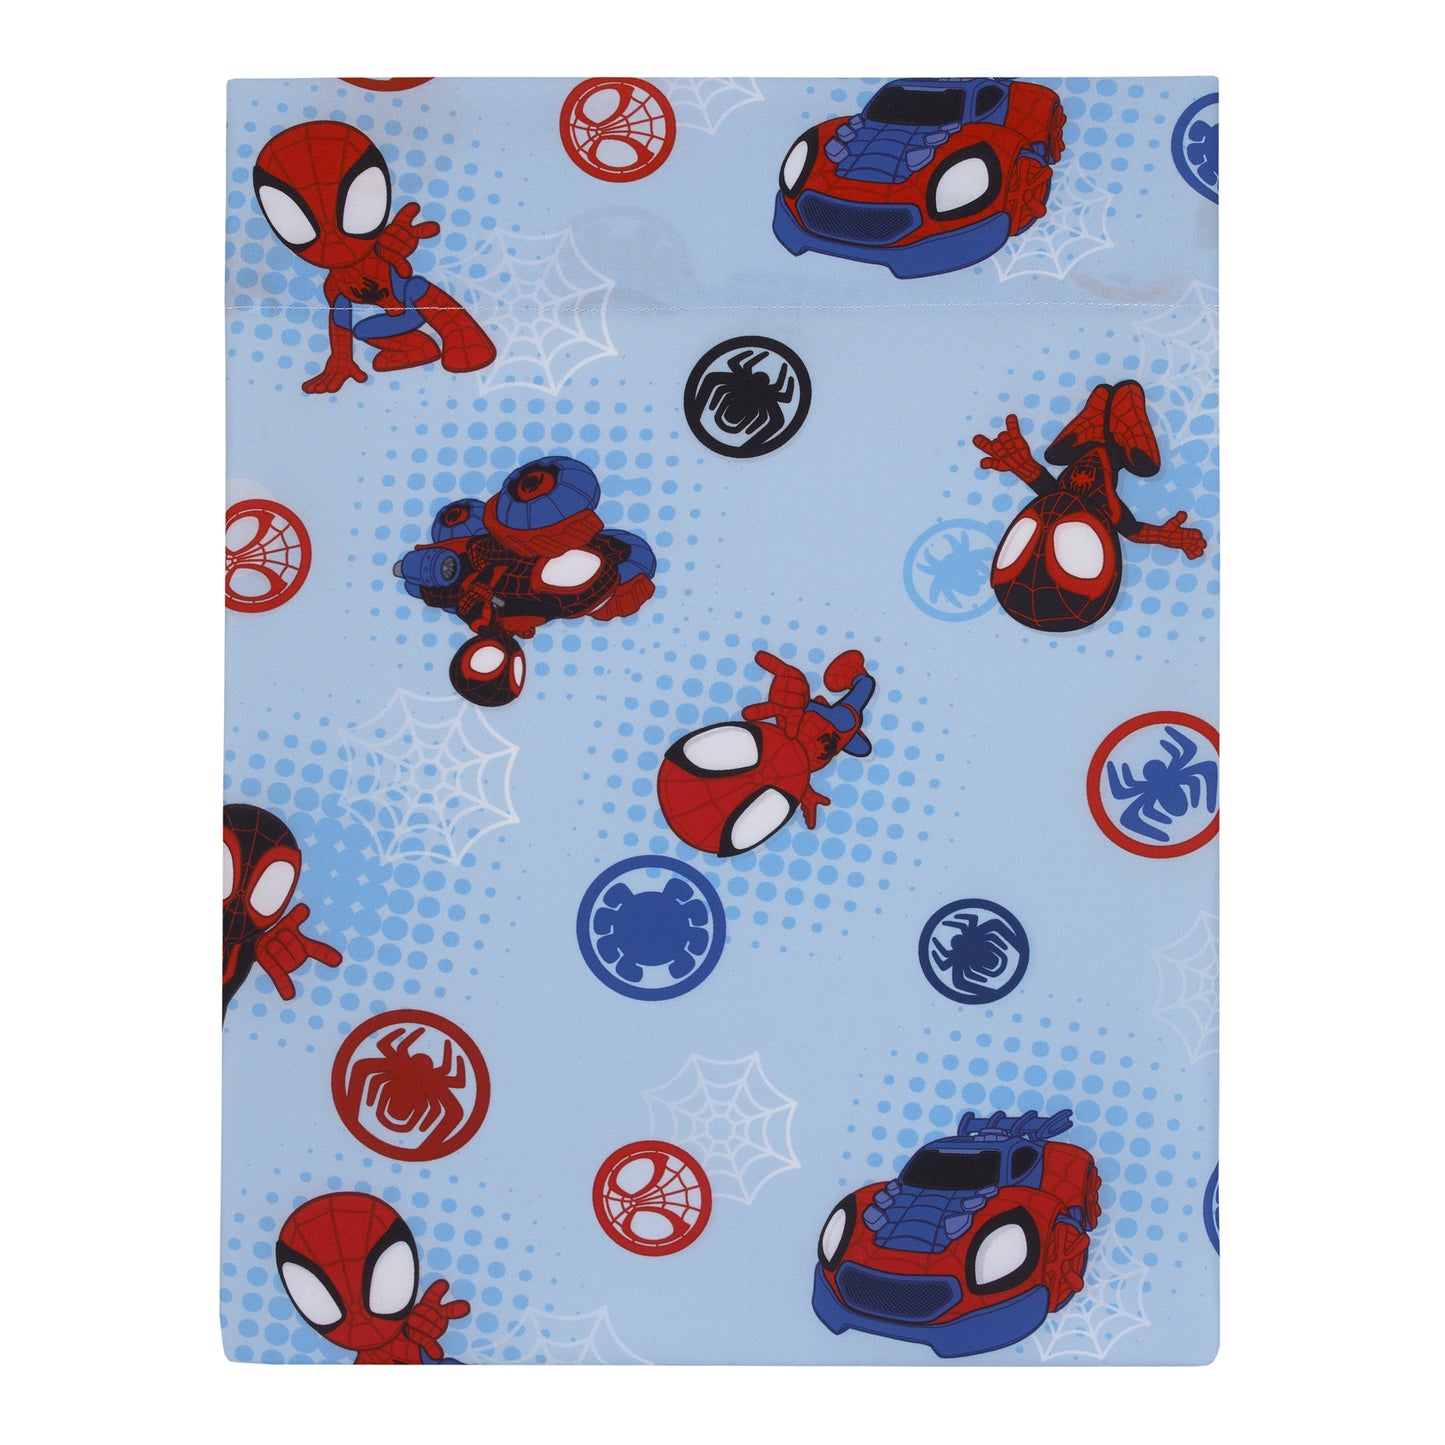 Marvel Spiderman Spidey and his Amazing Friends Spidey Time Red, Blue, and Grey 4 Piece Toddler Bed Set - Comforter, Fitted Bottom Sheet, Flat Top Sheet, and Reversible Pillowcase